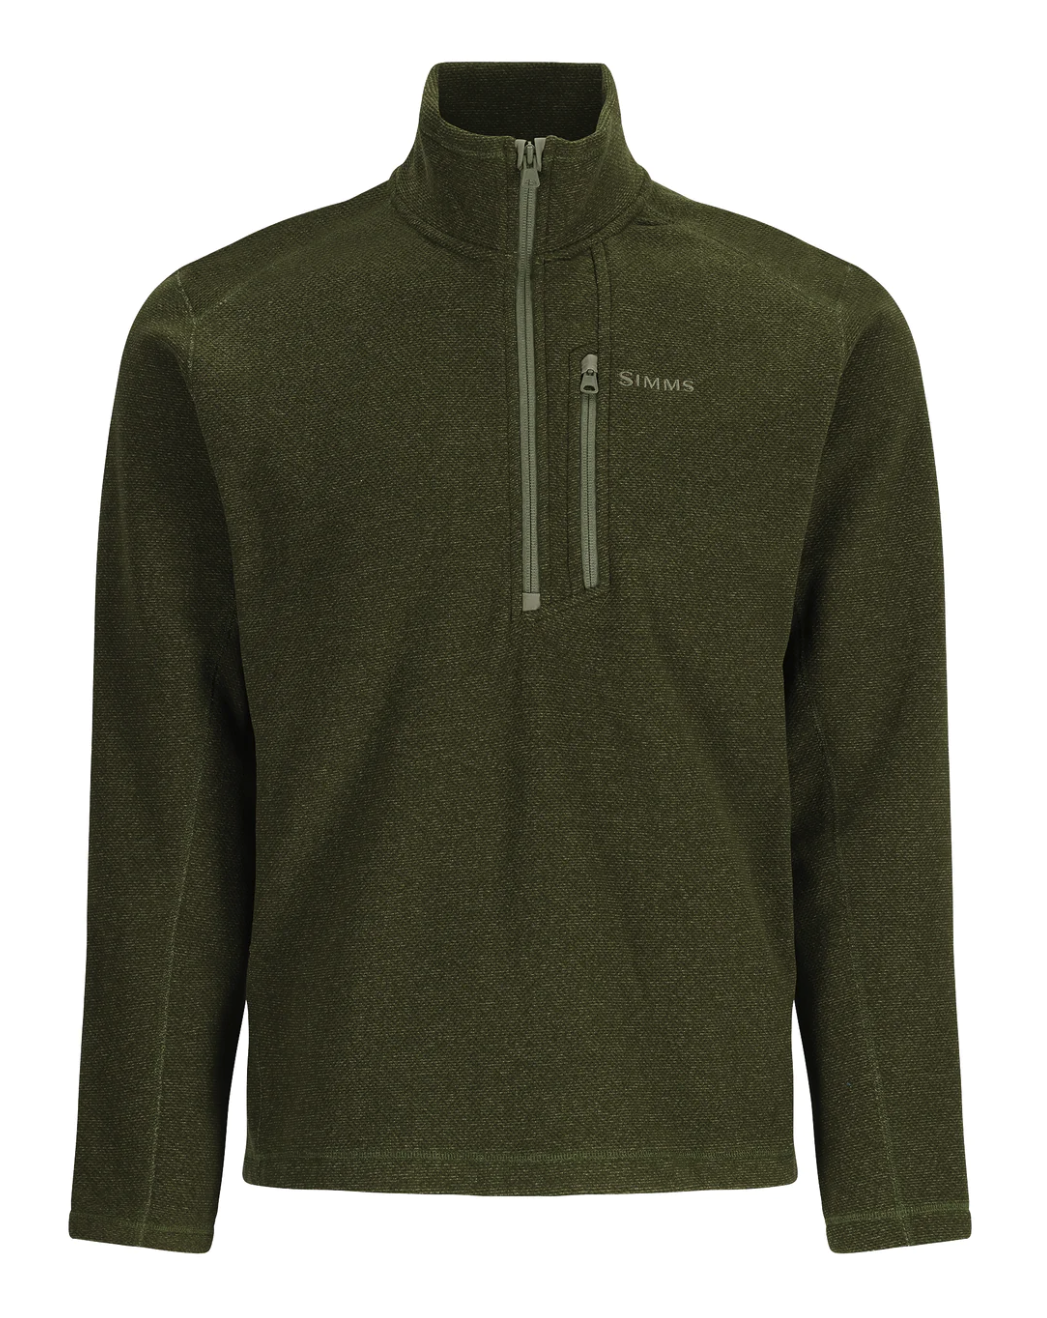 Simms Rivershed Half-Zip Fleece is a best layer for fly fishing clothing.